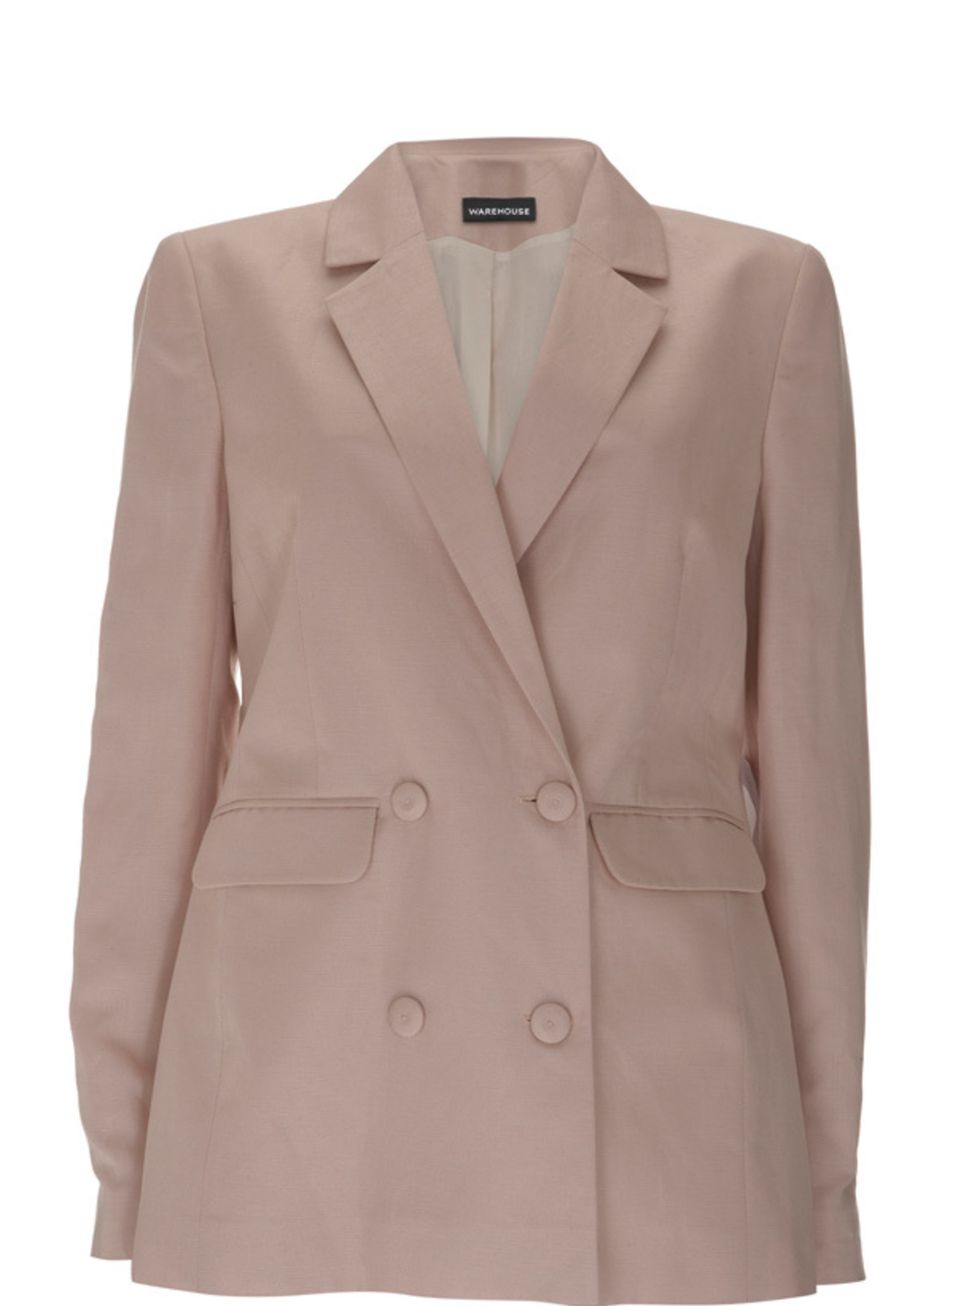 <p>Nude double breasted blazer, £65, by Warehouse (0870 1228 813)</p>